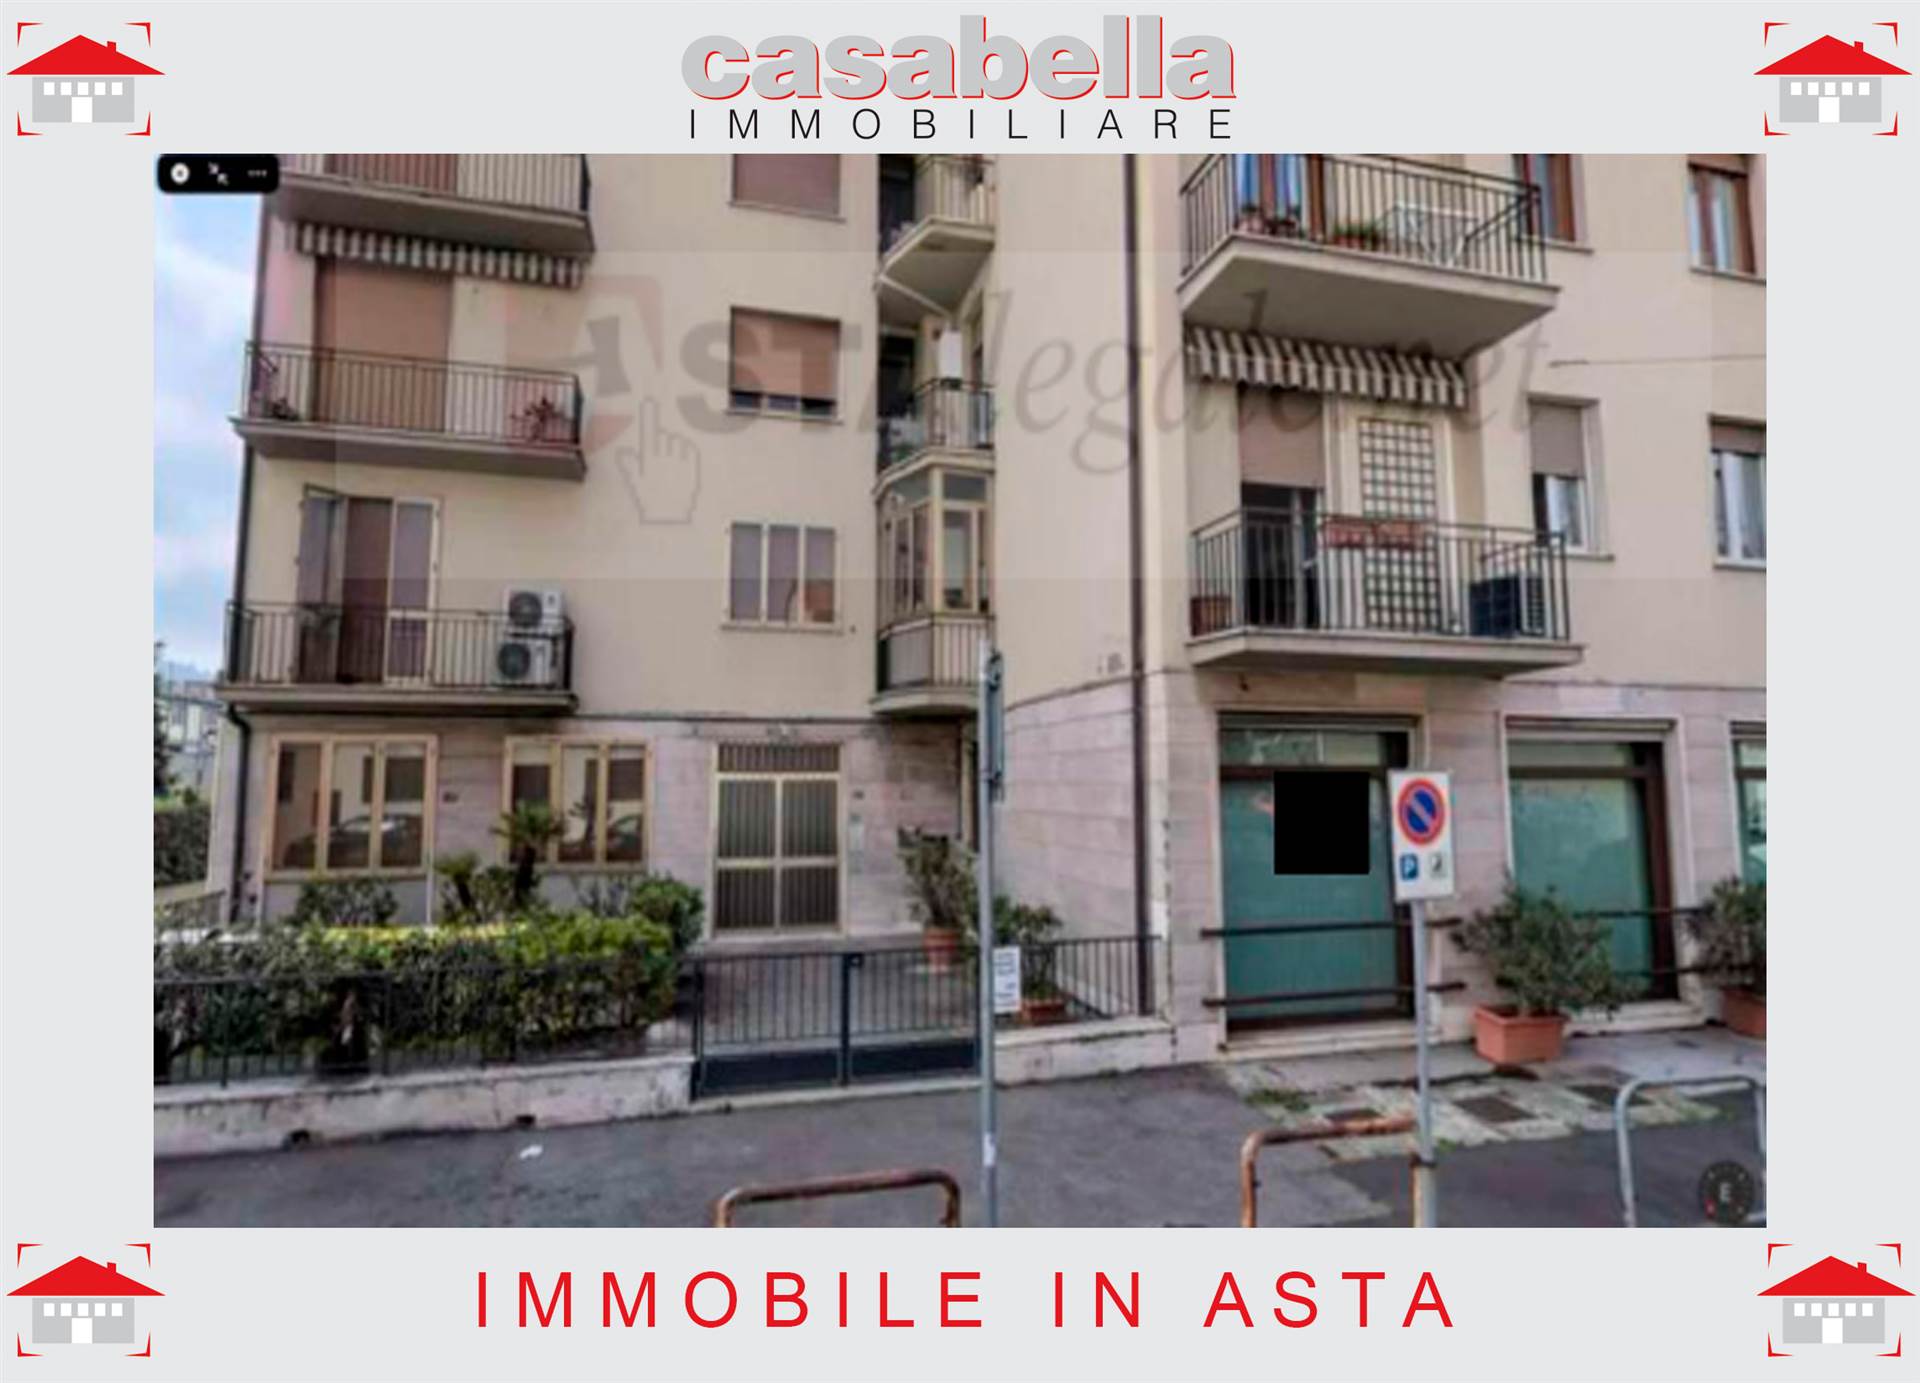 ZARINI, PRATO, Apartment for sale of 51 Sq. mt., Be restored, Heating Individual heating system, Energetic class: G, placed at Basement on 6, composed by: 3 Rooms, Separate kitchen, , 2 Bedrooms, 1 